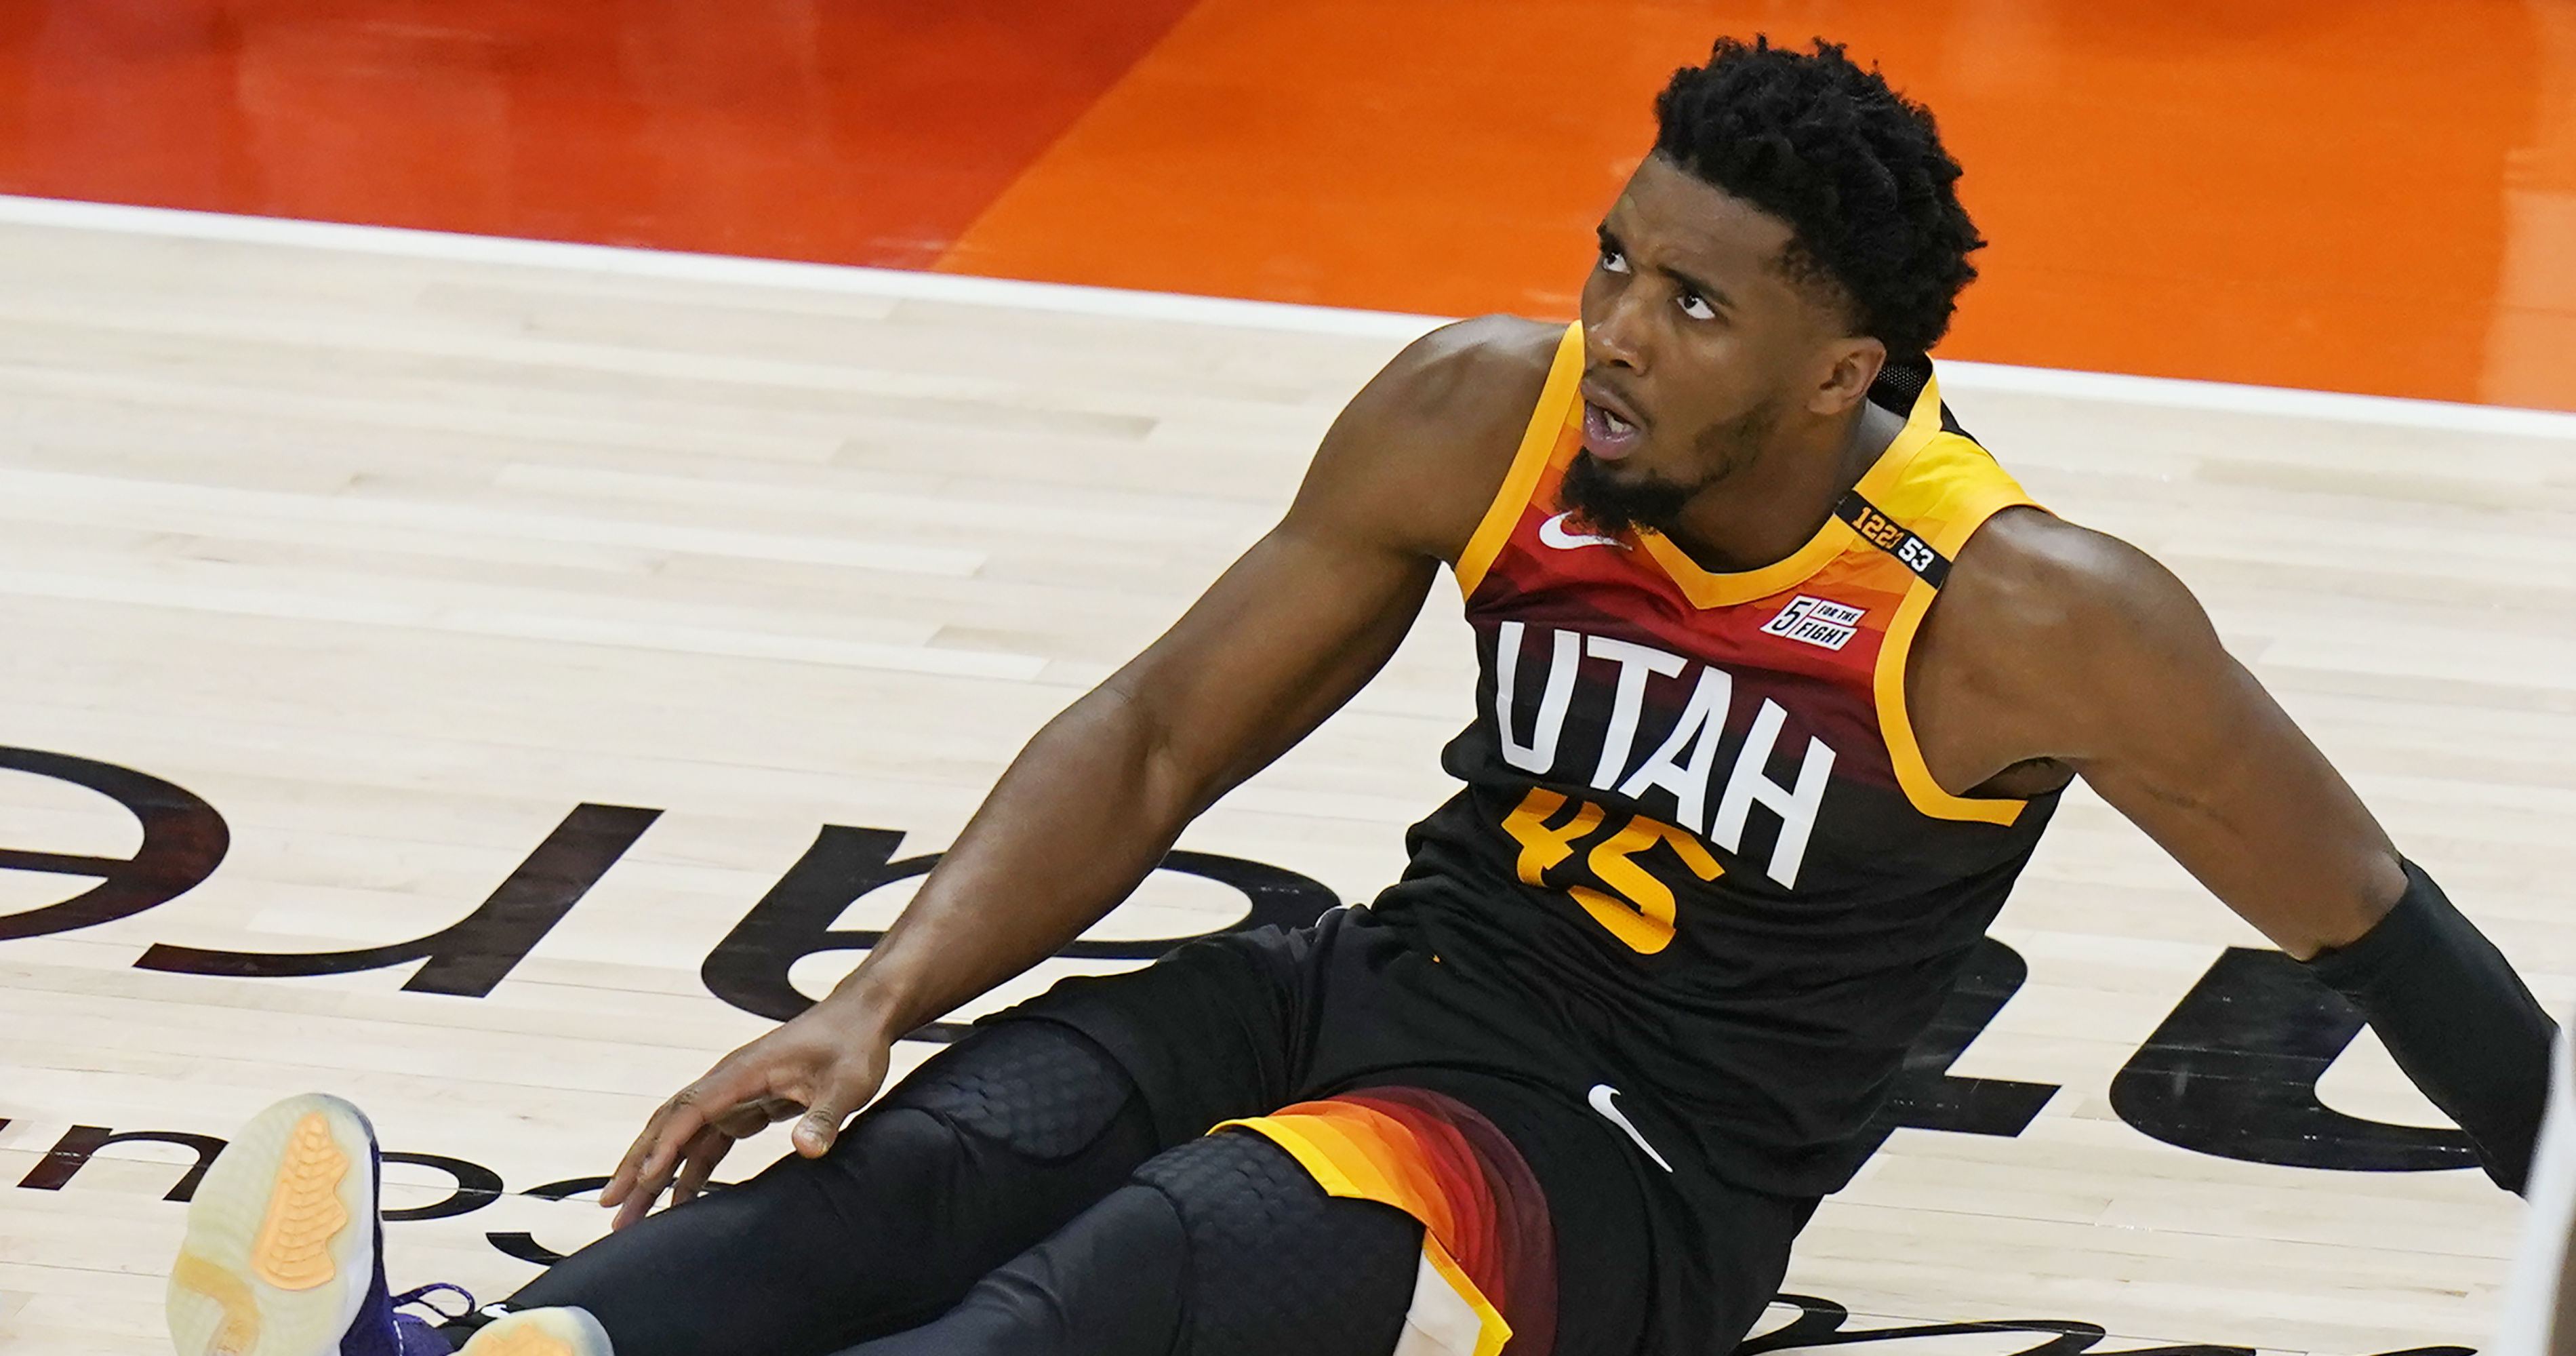 Jordan Clarkson is ready for the return of Donovan Mitchell: 'He's a real,  real superstar